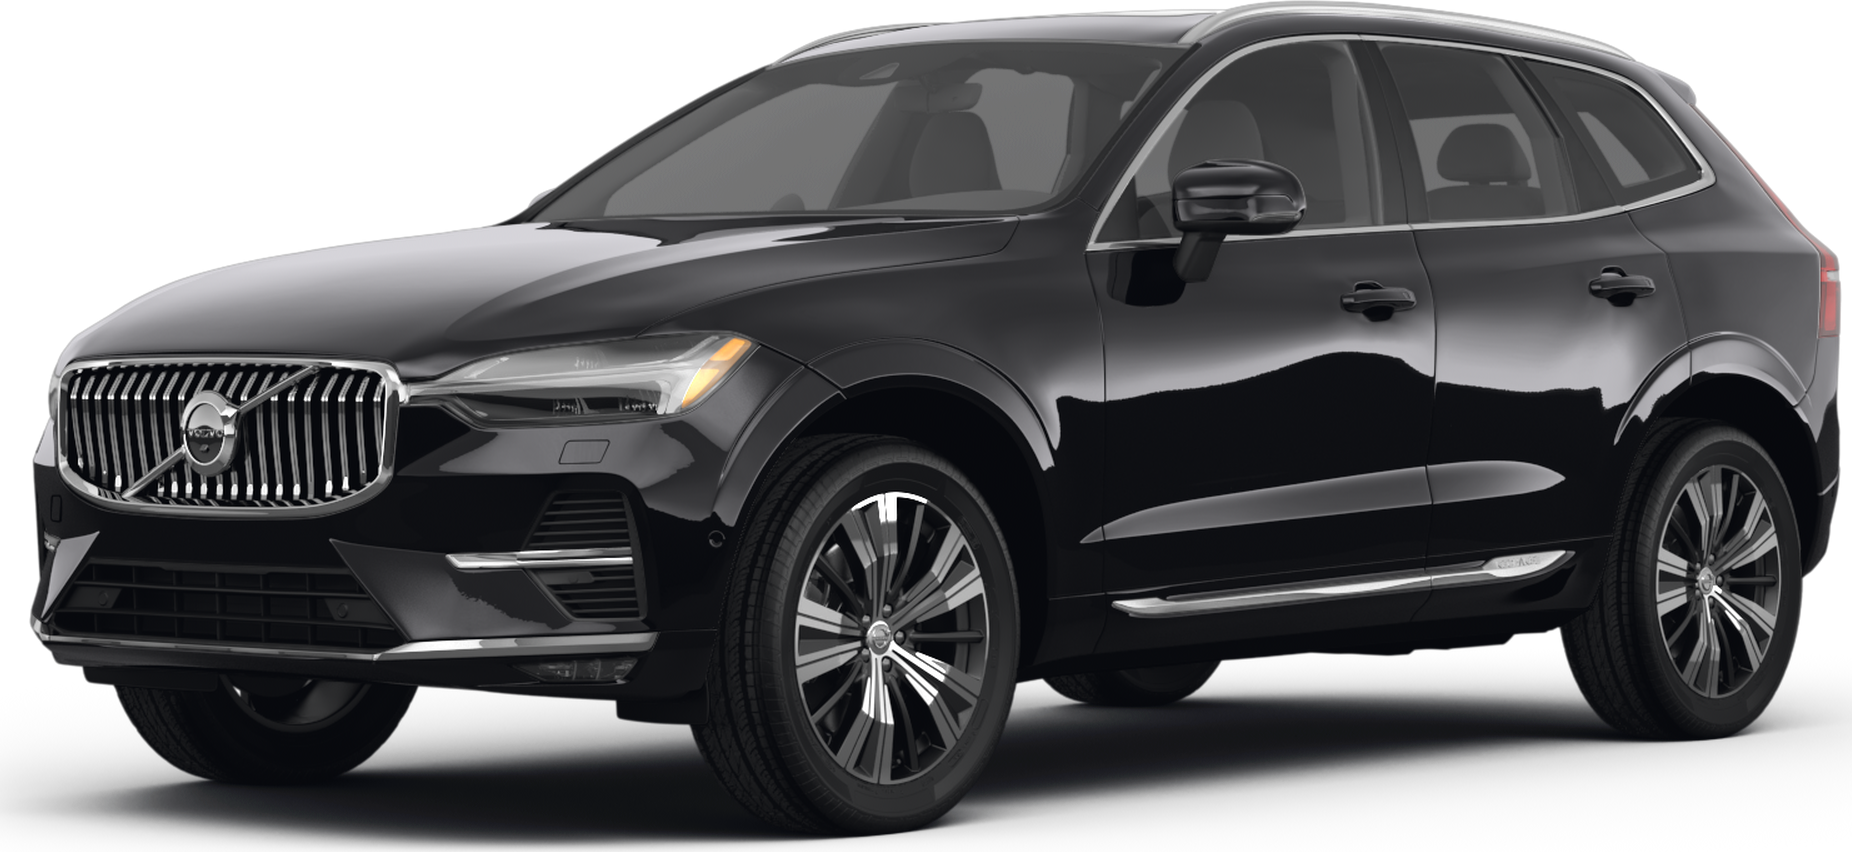 https://file.kelleybluebookimages.com/kbb/base/evox/CP/15317/2022-Volvo-XC60-front_15317_032_1852x852_717_cropped.png